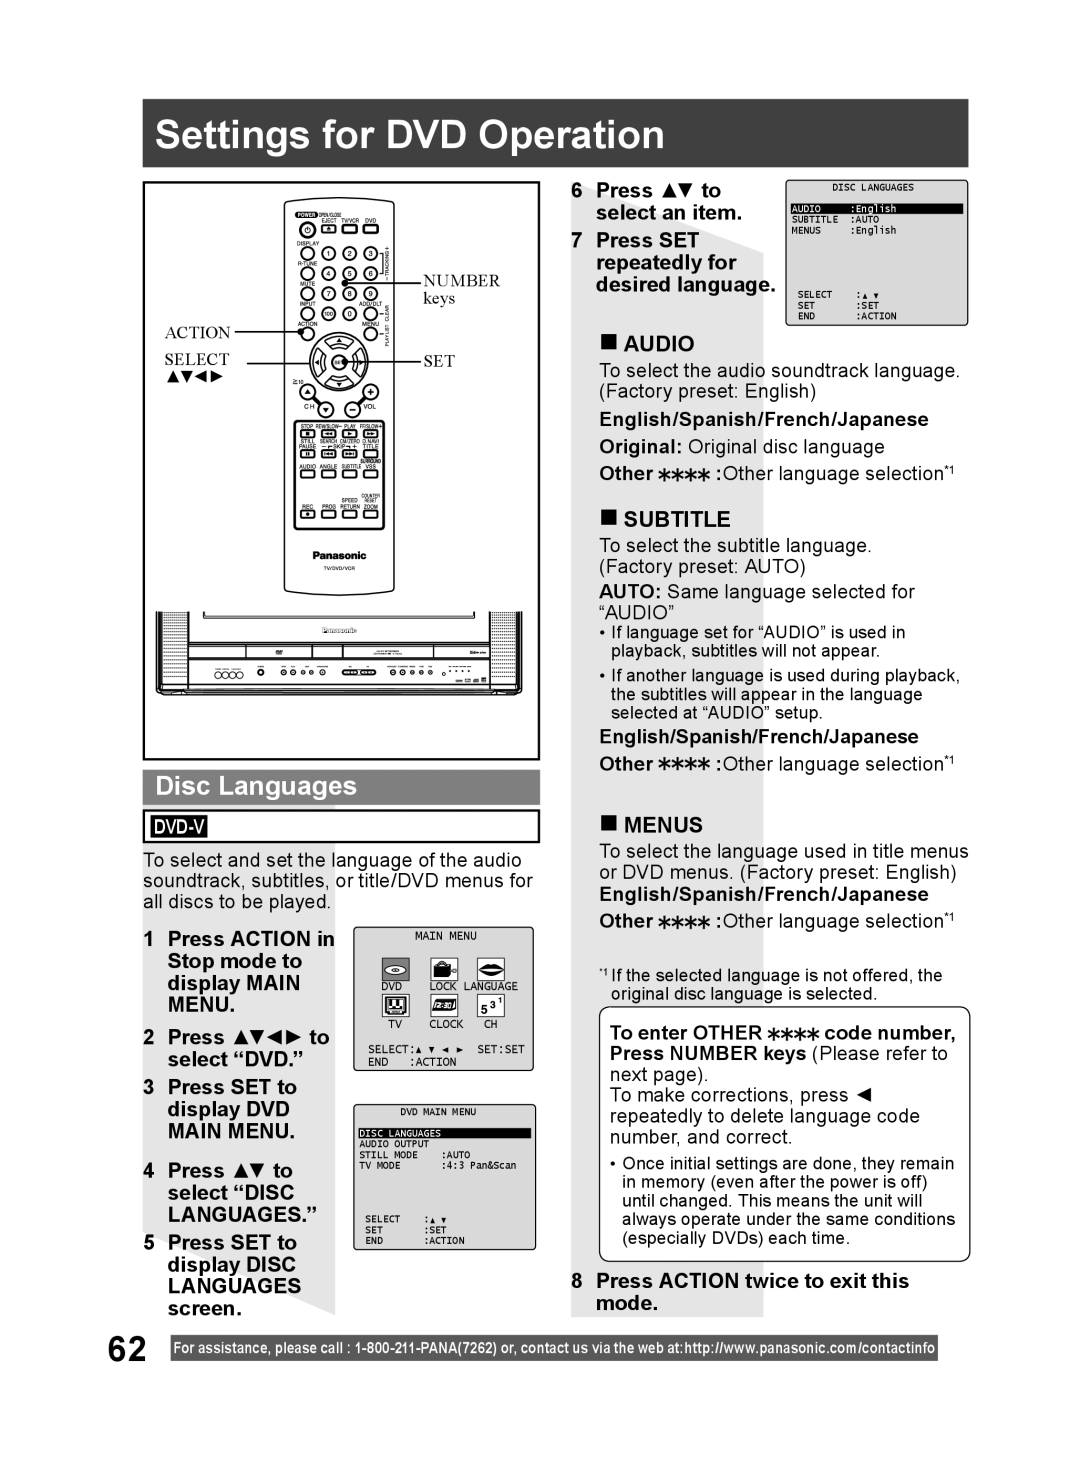 Panasonic PV DF2004 Settings for DVD Operation, Disc Languages, Press ACTION in, Stop mode to, display MAIN, Menu, Audio 